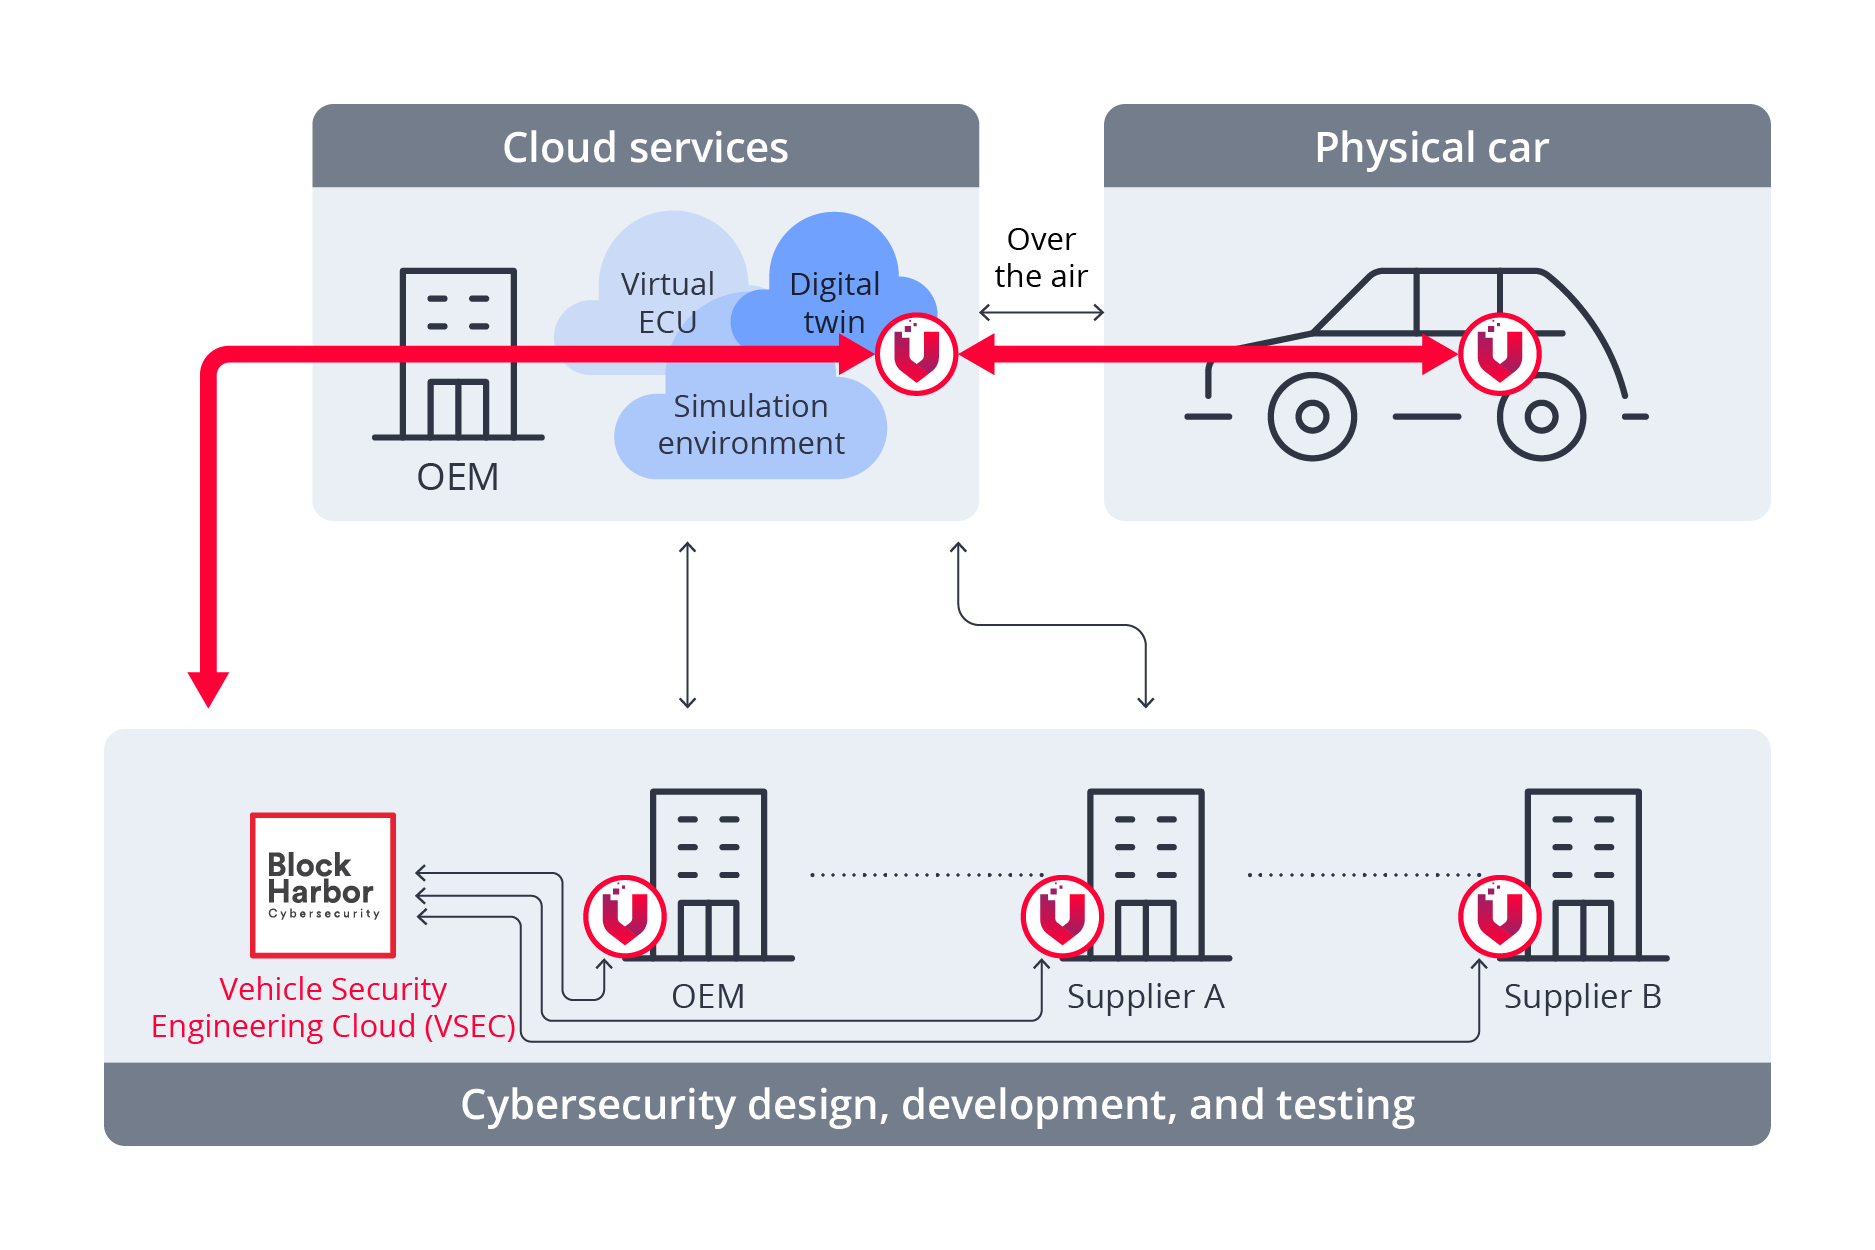 The combined VicOne & Block Harbor solution for Software-Defined Vehicles